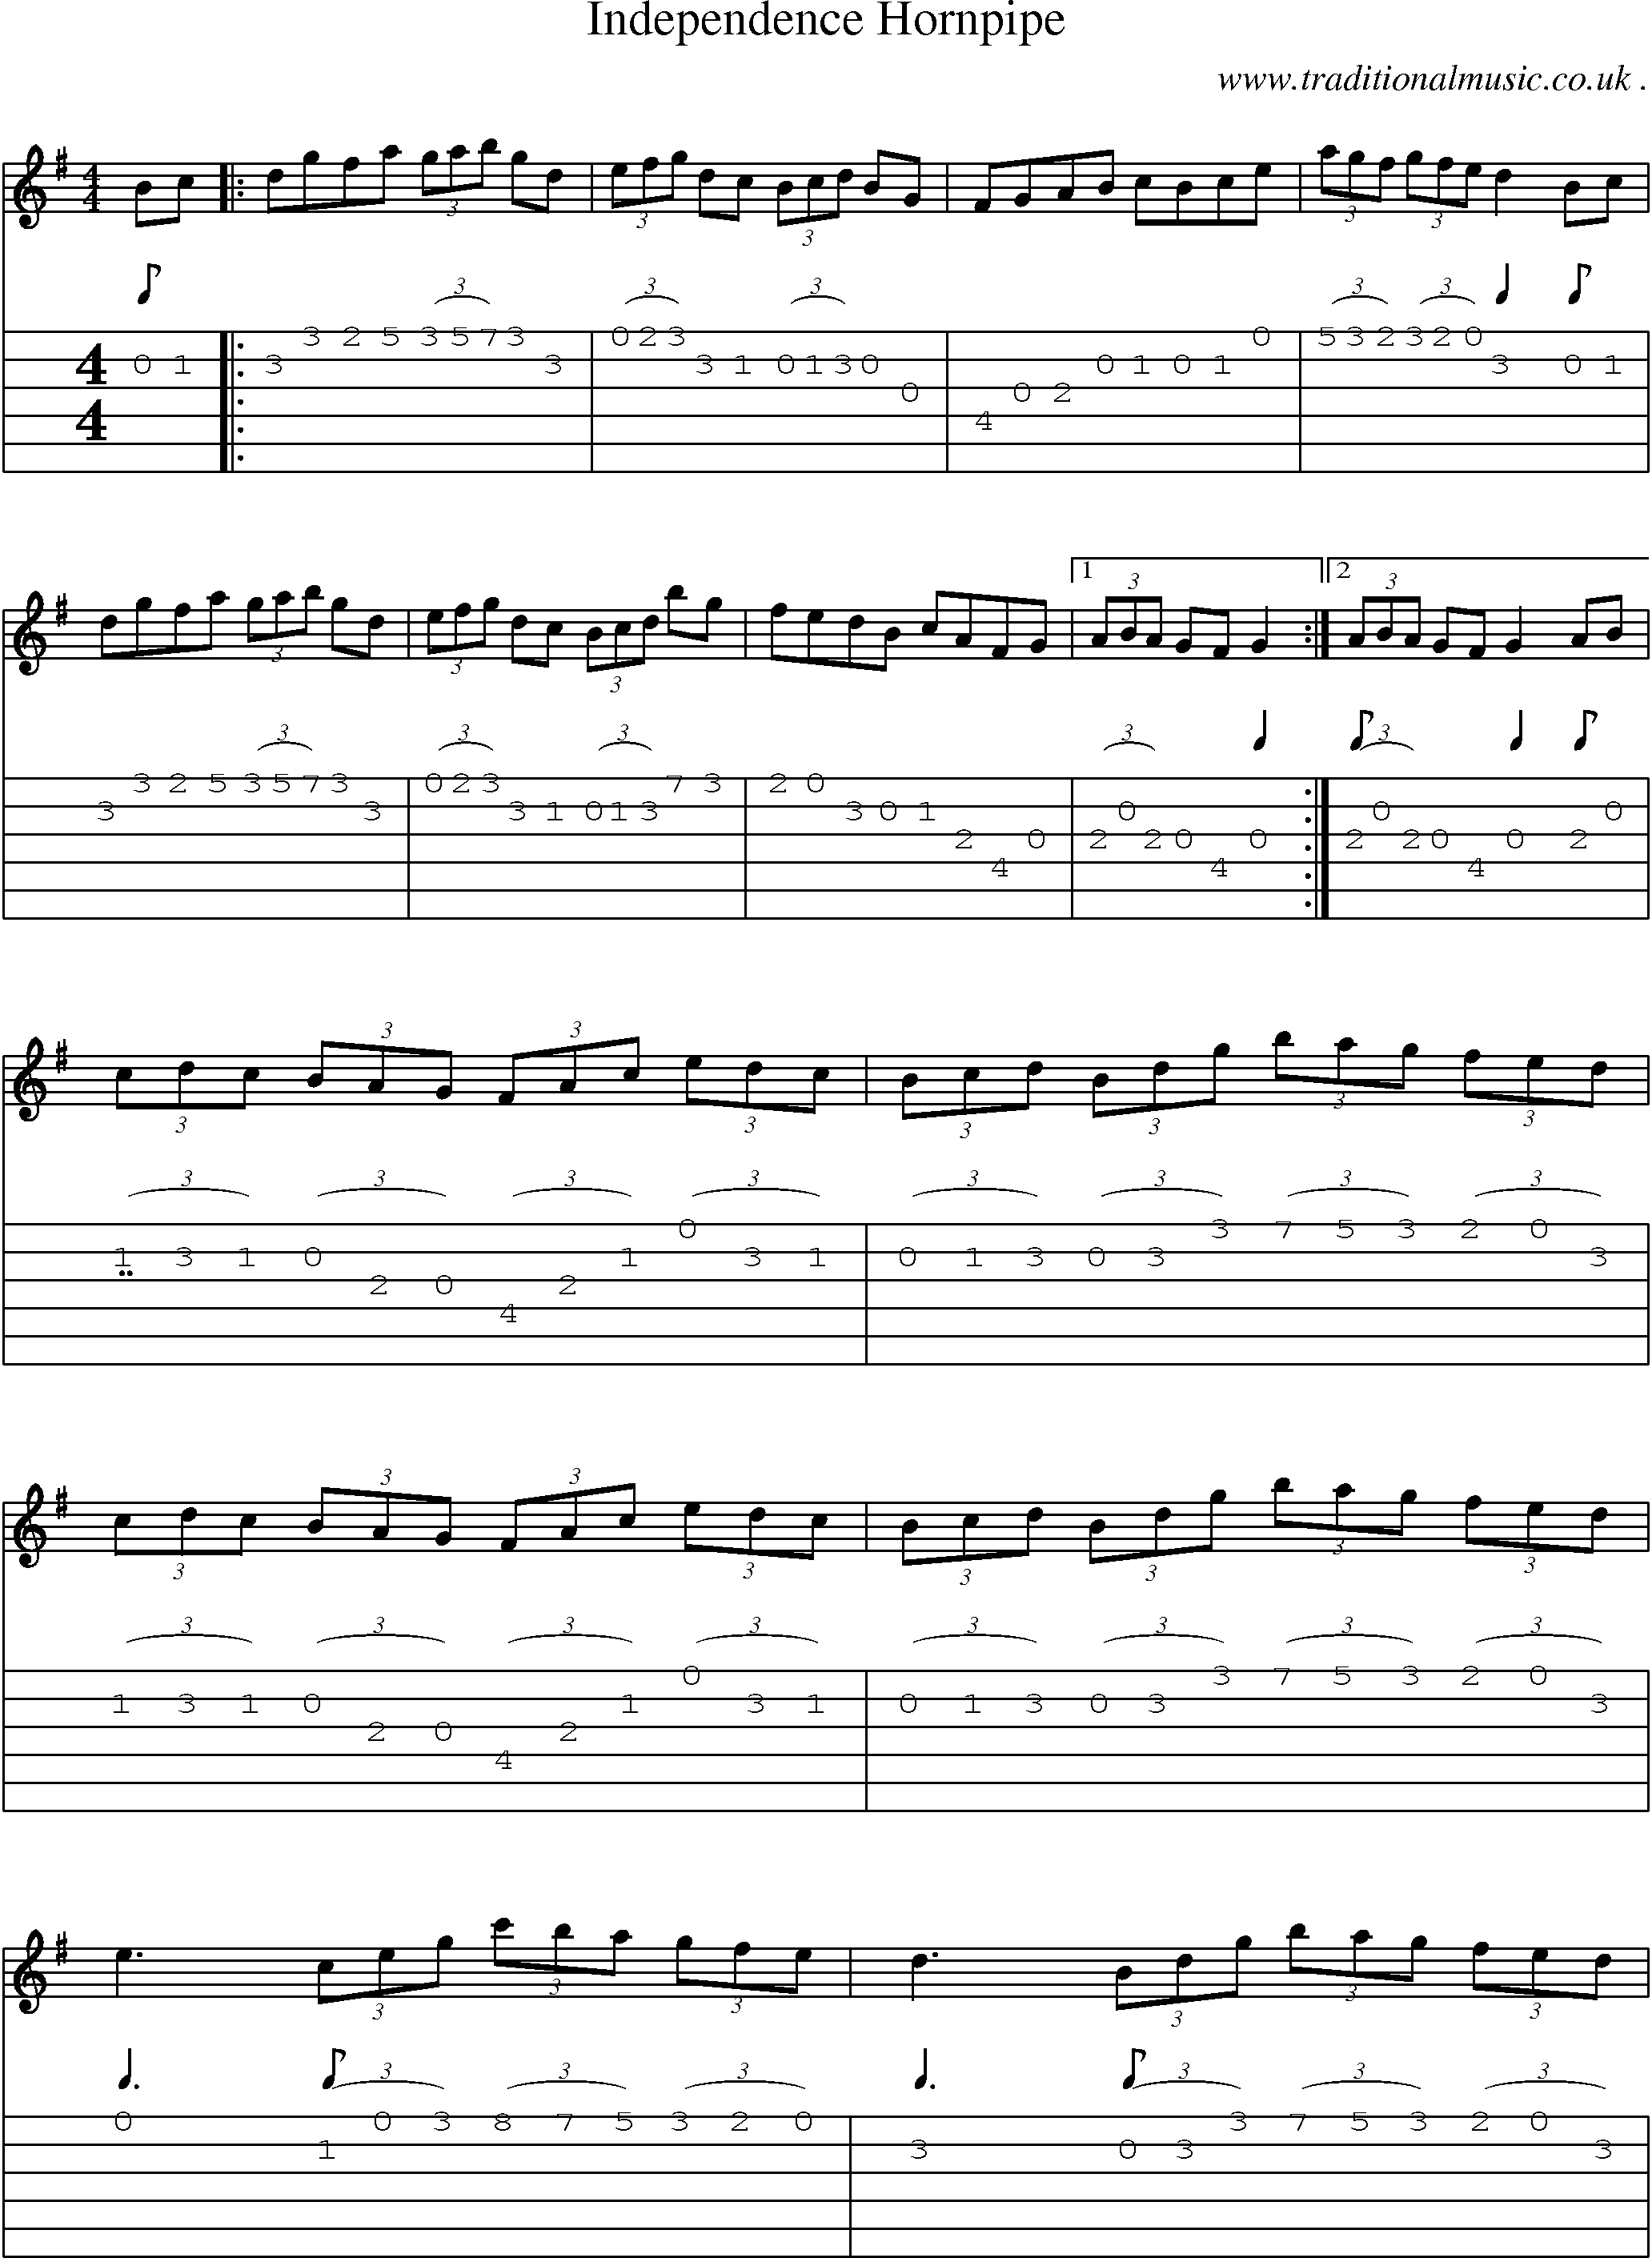 Sheet-Music and Guitar Tabs for Independence Hornpipe